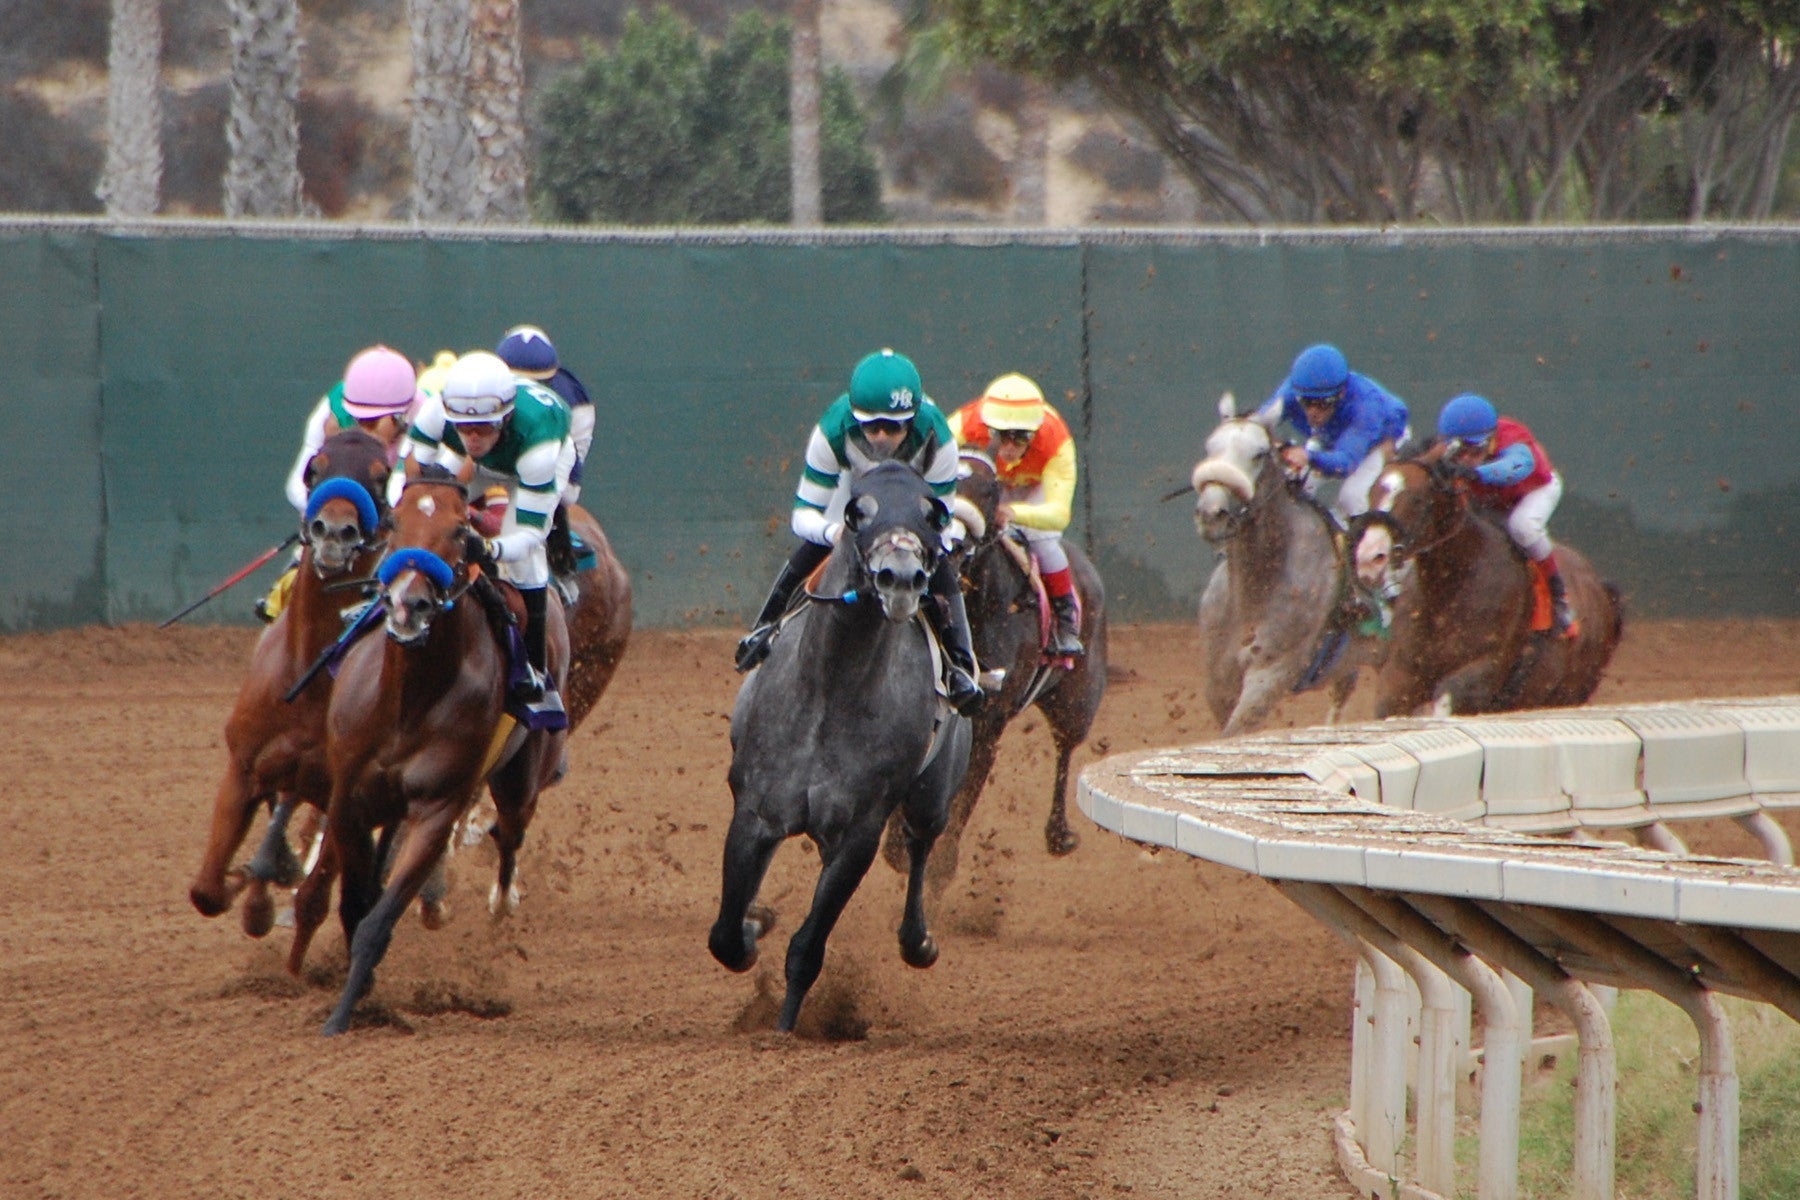 Tales from the Field: A Day at the Races - Cotton Camera Carrying Systems